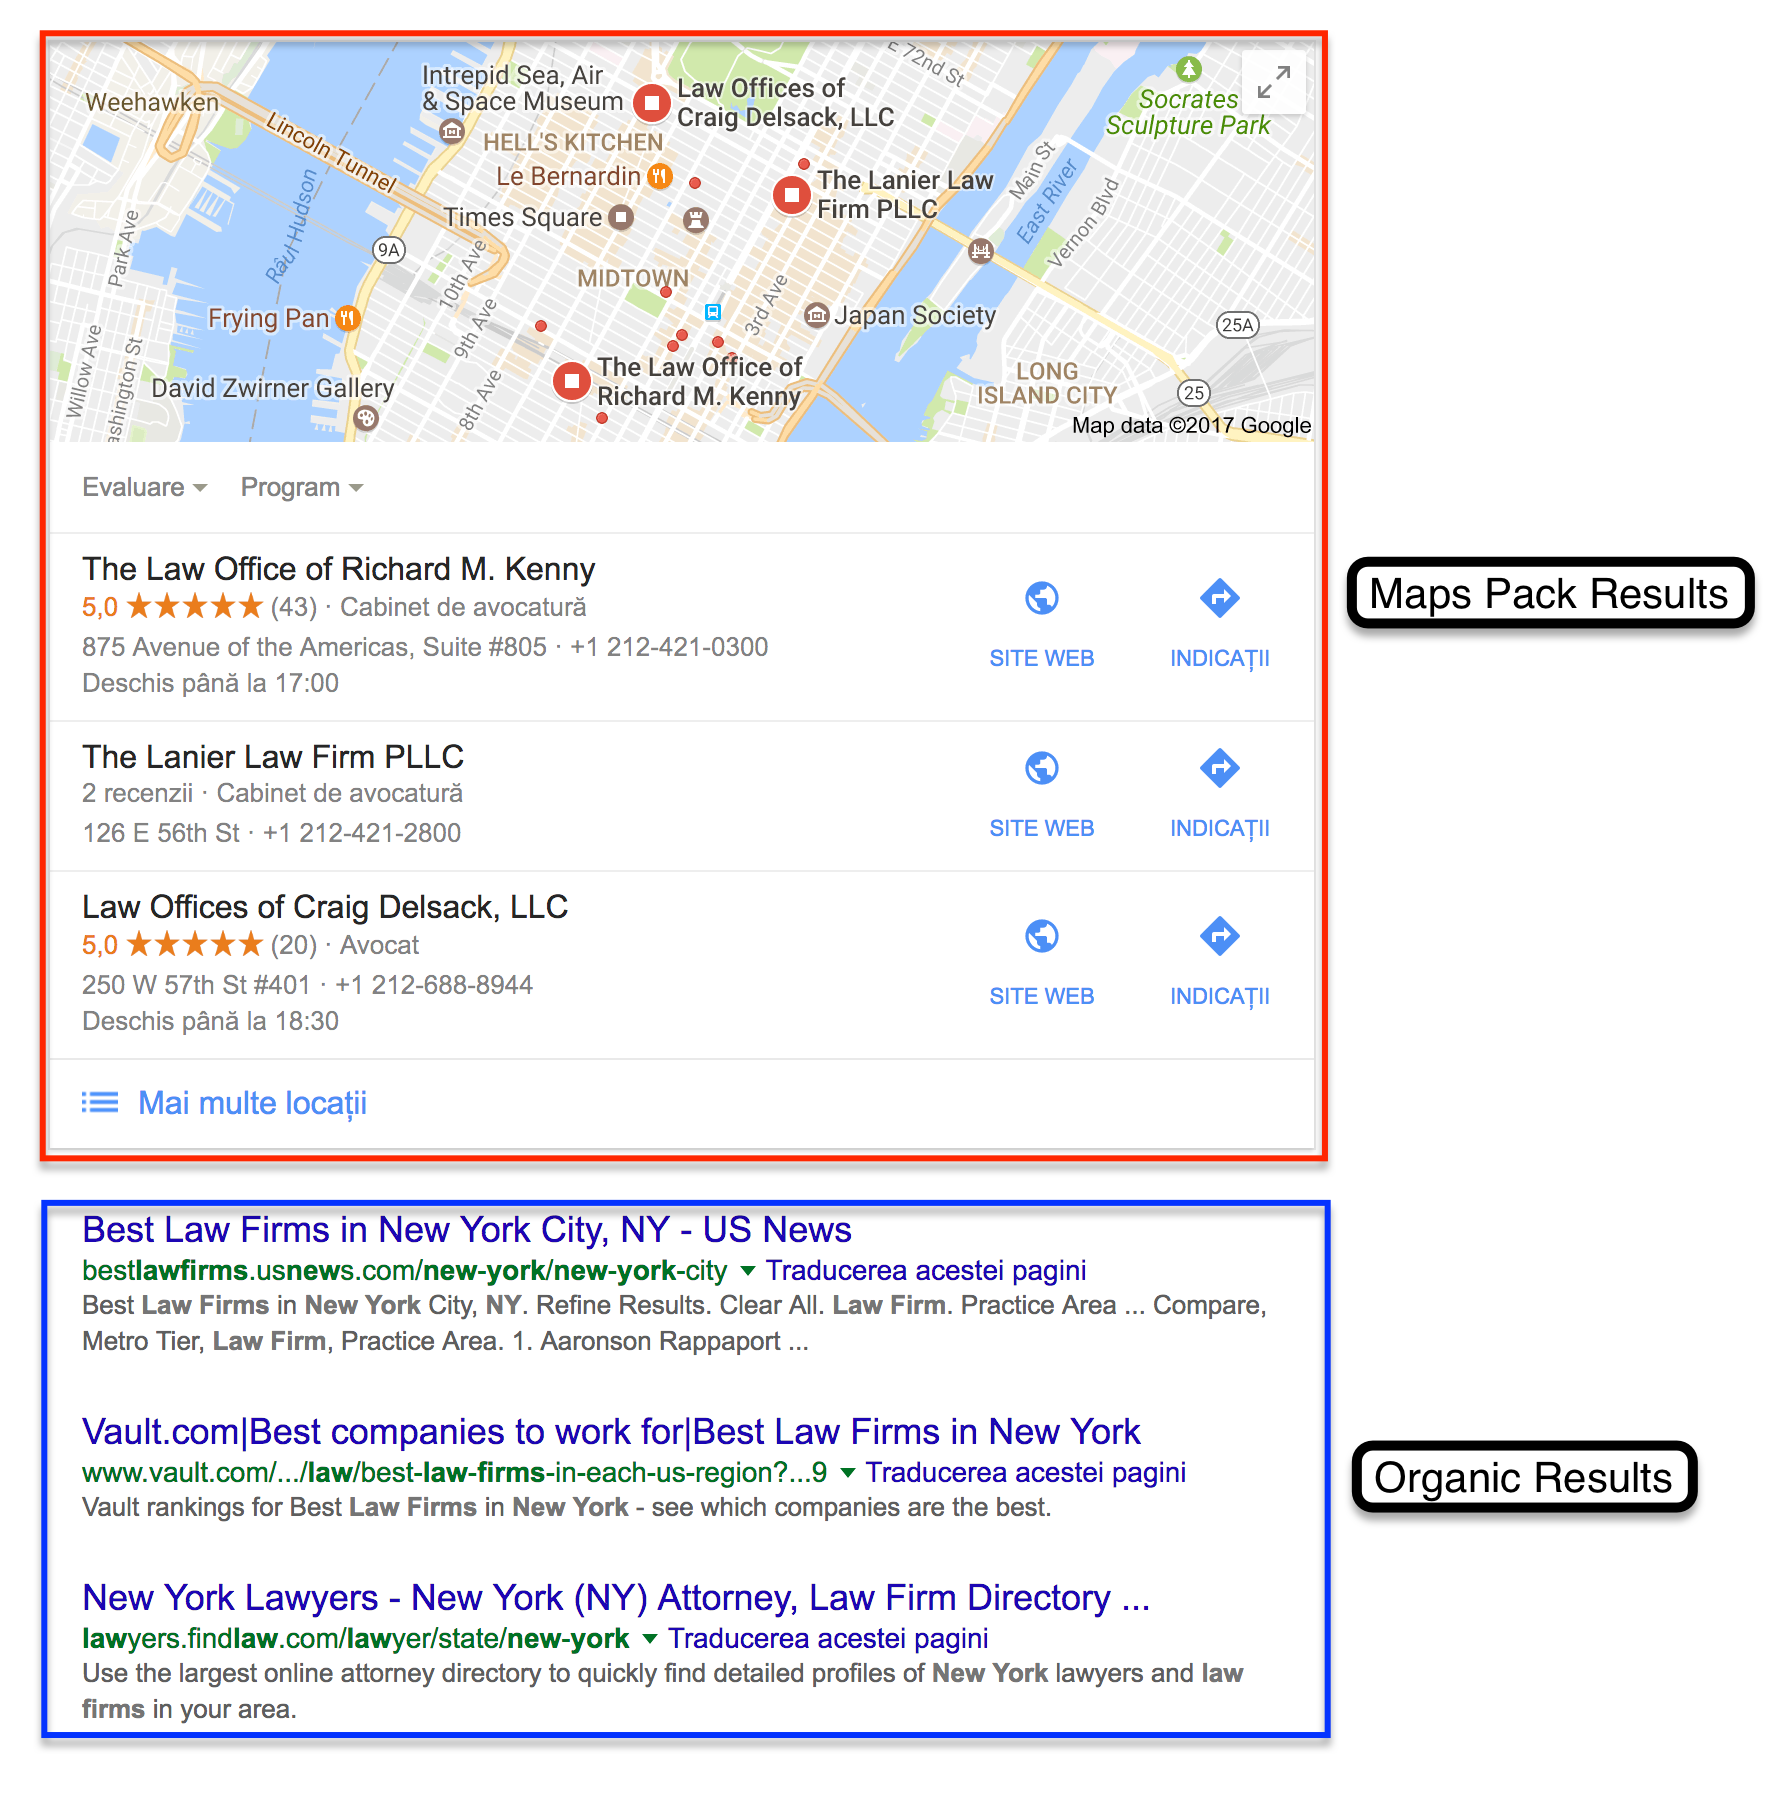 Google Organic and Maps Pack Results